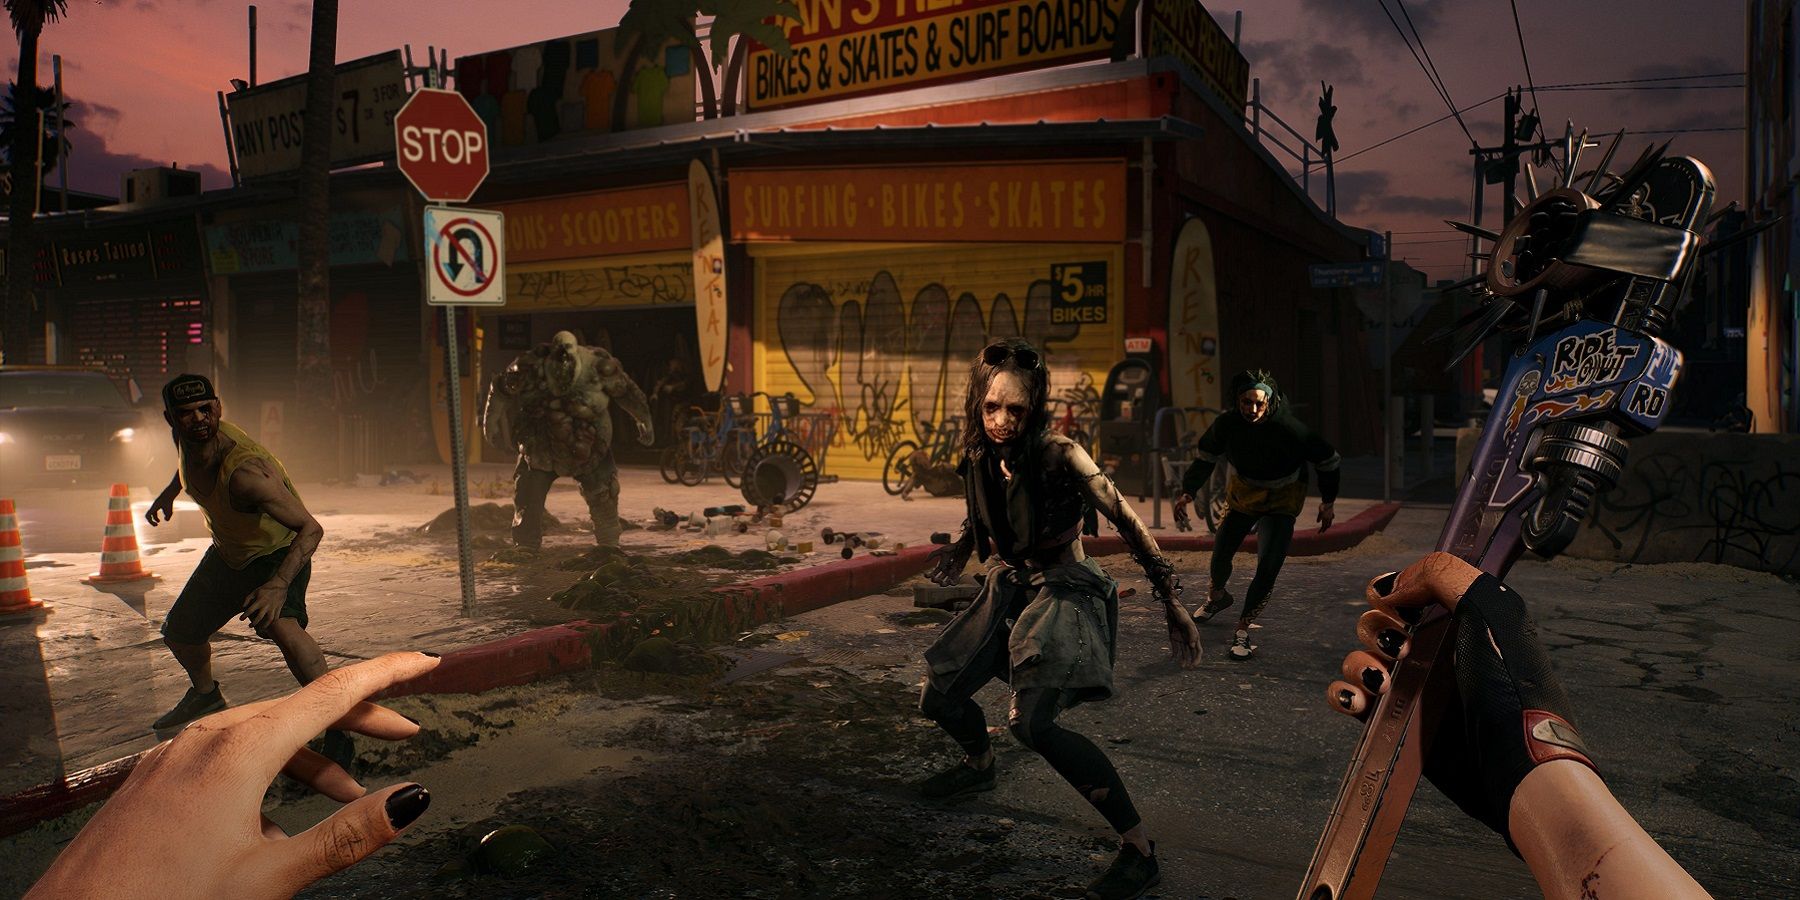 Image from Dead Island 2 showing zombie approaching the player who's holding a wrench.